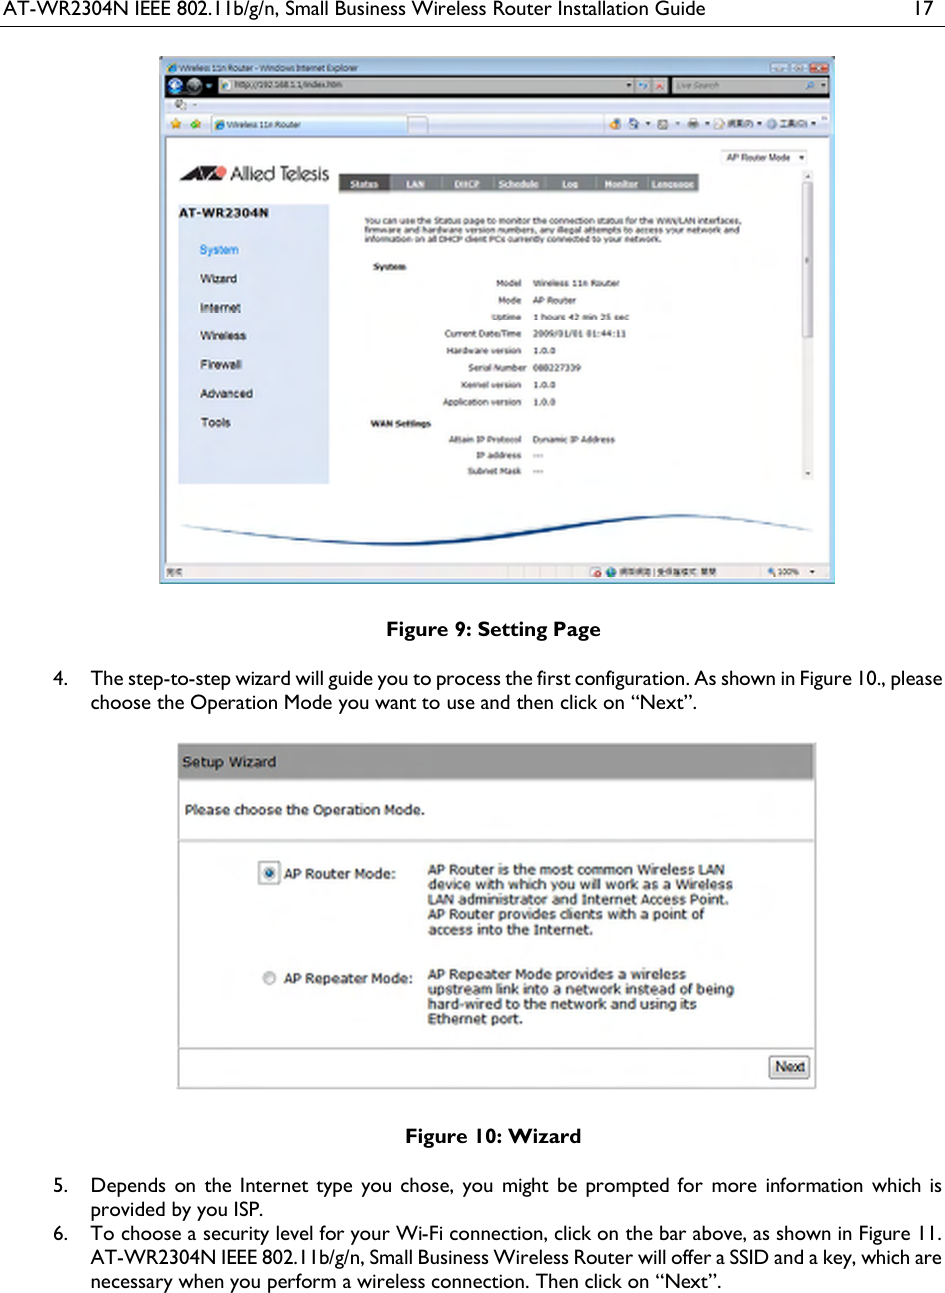 AT-WR2304N IEEE 802.11b/g/n, Small Business Wireless Router Installation Guide  17   Figure 9: Setting Page  The step-to-step wizard will guide you to process the first configuration. As shown in Figure 10., please 4.choose the Operation Mode you want to use and then click on “Next”.   Figure 10: Wizard  Depends on the Internet type you  chose, you might be  prompted for  more  information which  is 5.provided by you ISP.  To choose a security level for your Wi-Fi connection, click on the bar above, as shown in Figure 11. 6.AT-WR2304N IEEE 802.11b/g/n, Small Business Wireless Router will offer a SSID and a key, which are necessary when you perform a wireless connection. Then click on “Next”. 